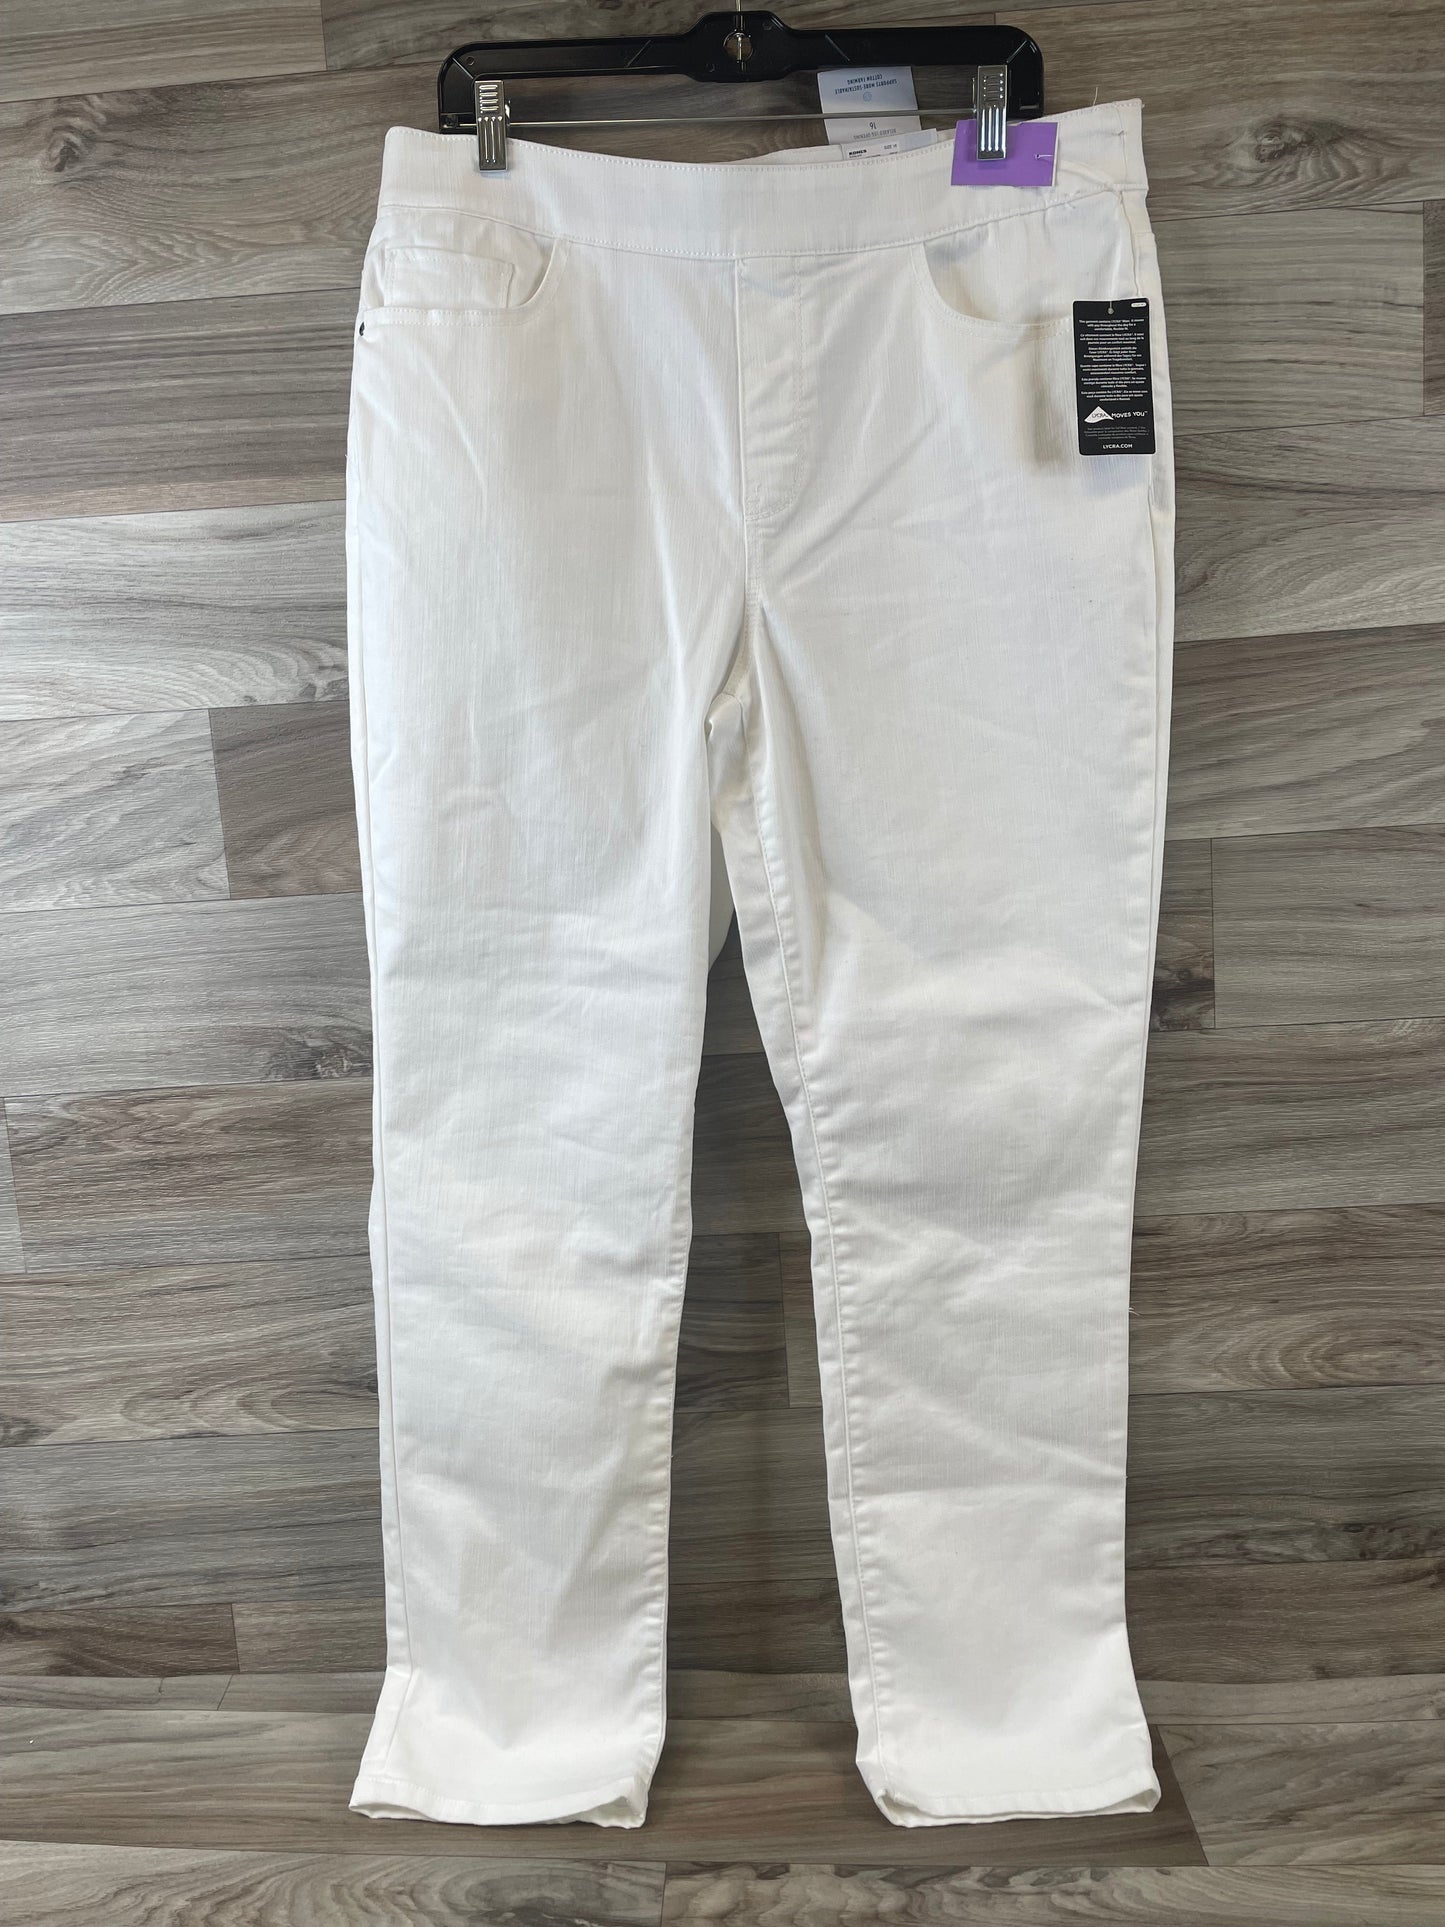 White Jeans Straight Croft And Barrow, Size 16